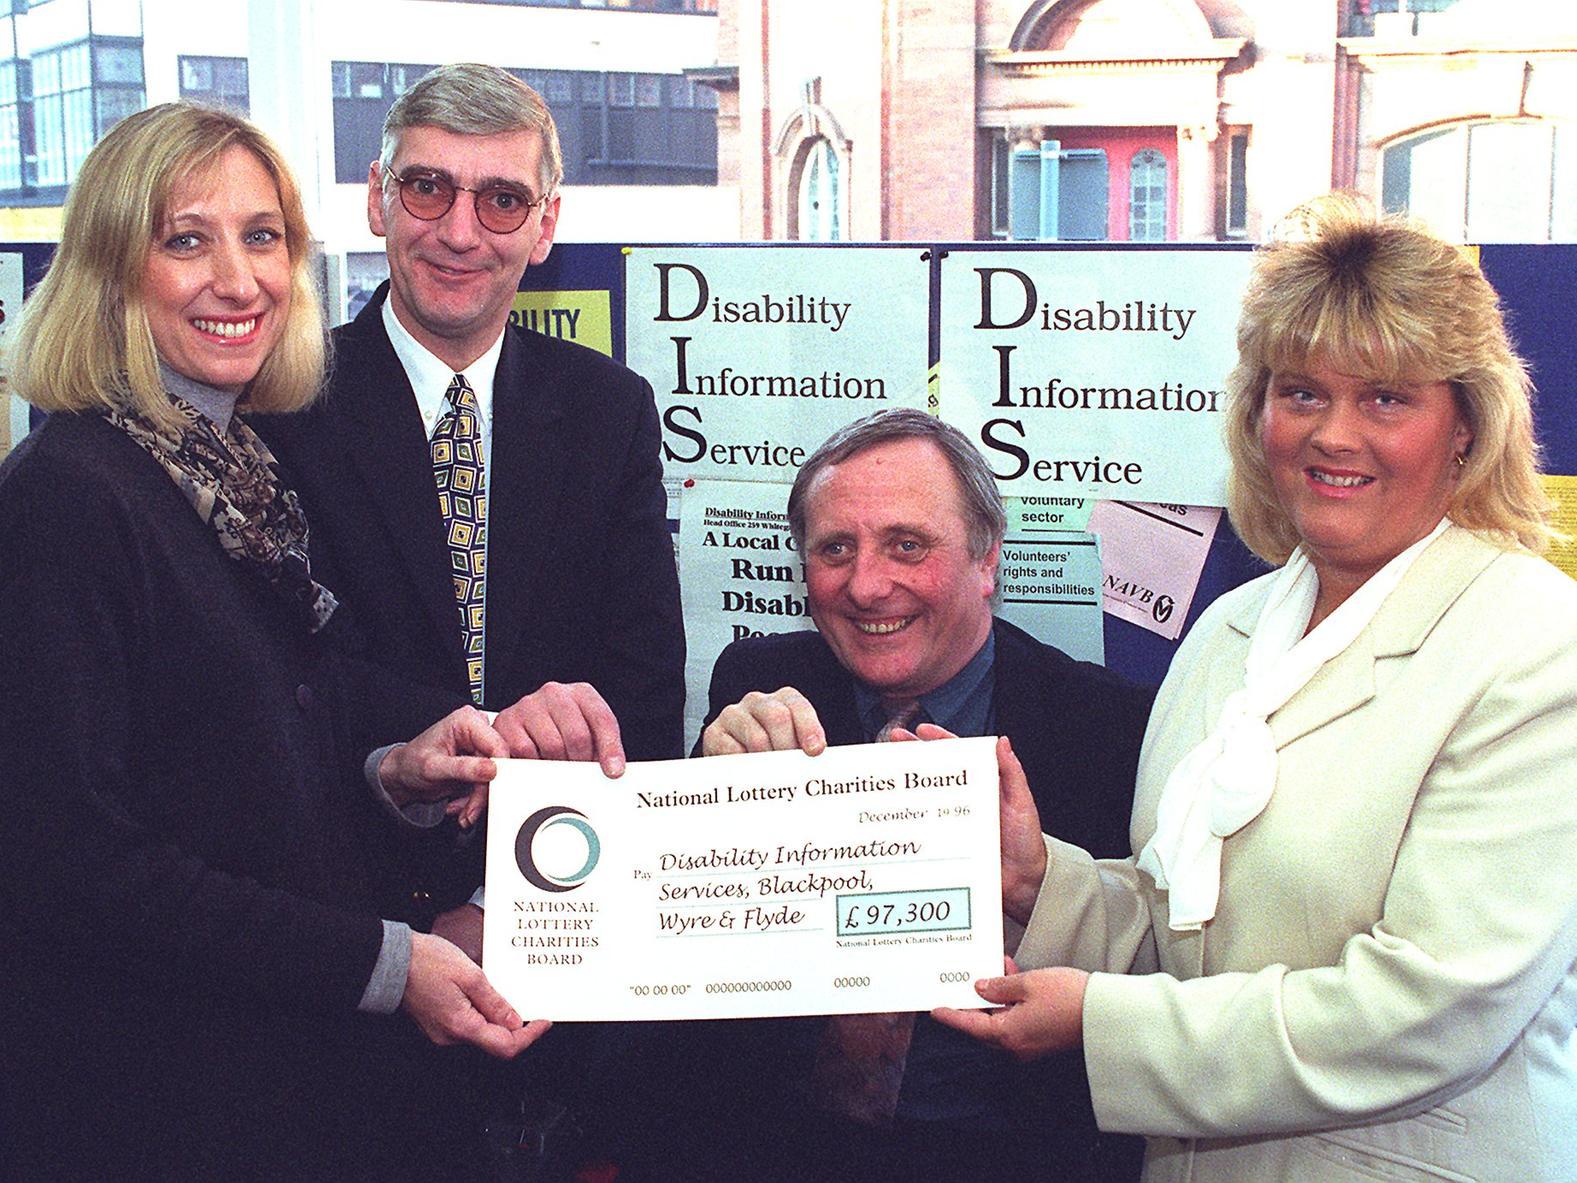 Blackpools Disability Information Service received just short of 100,000 towards their work from the National Lottery Charities Board in 1997.